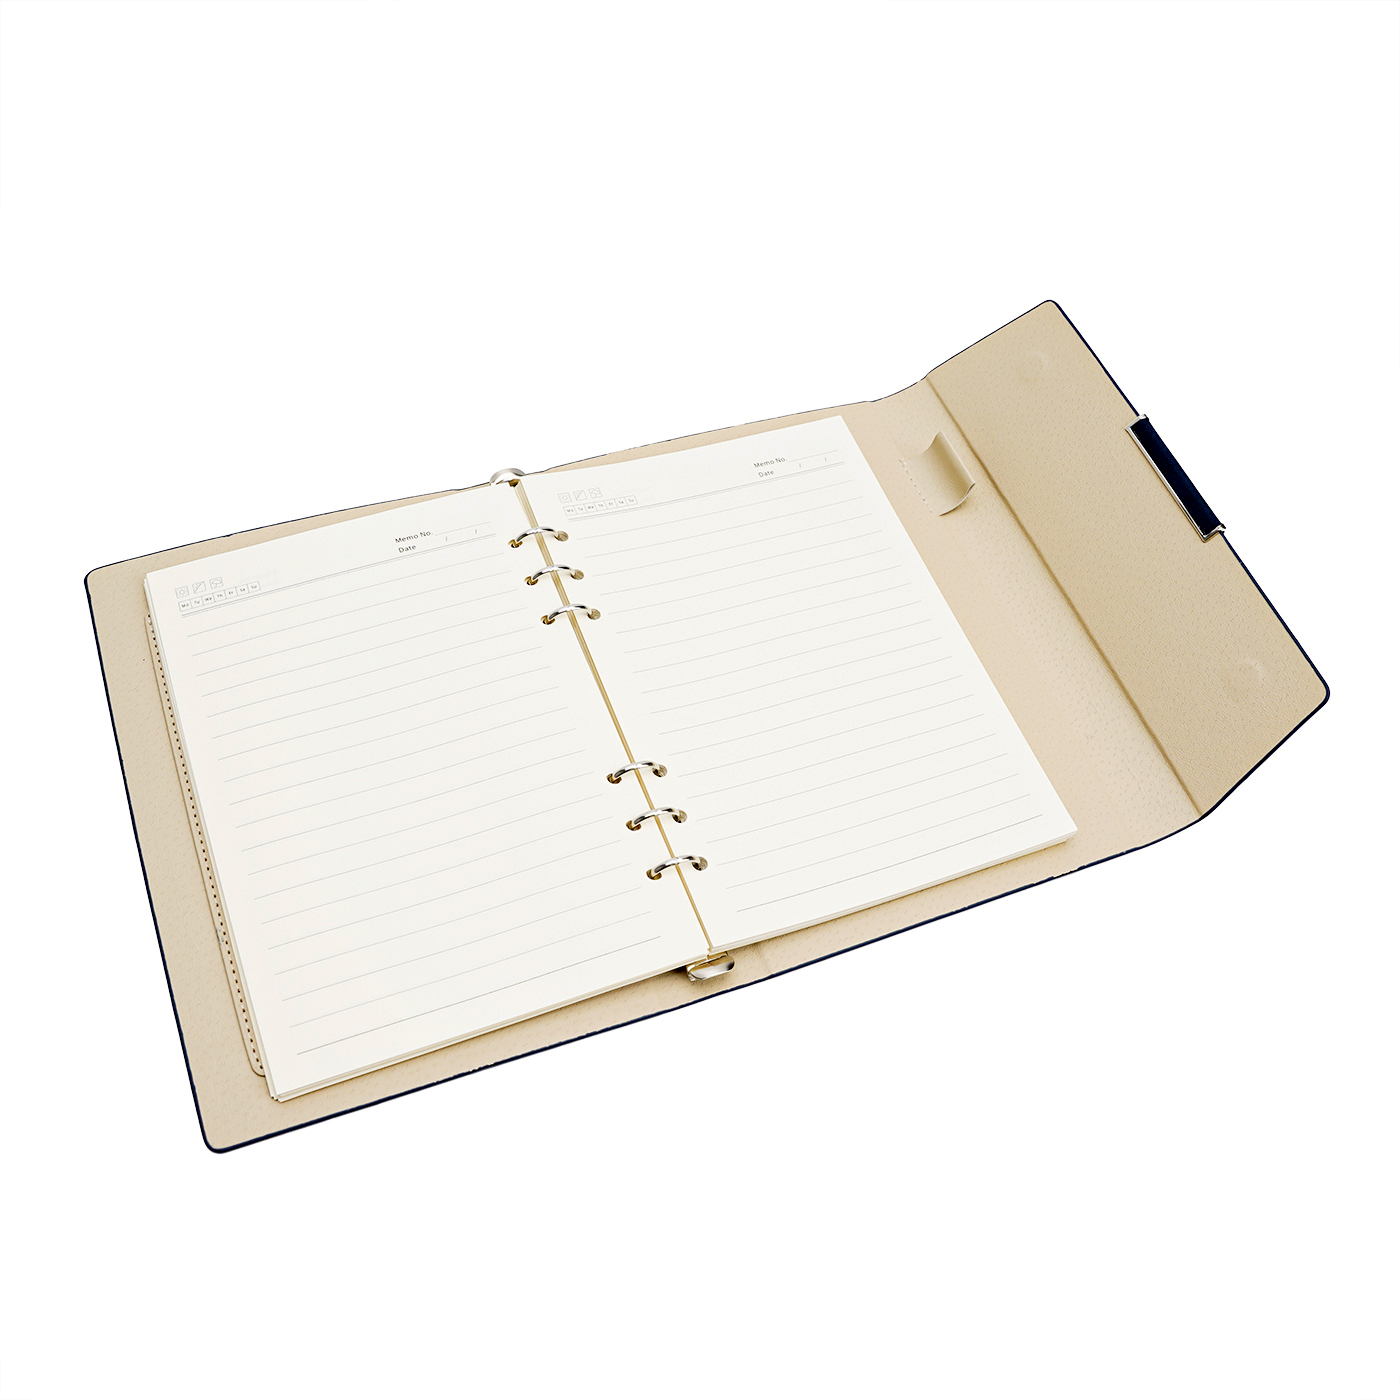 A5 Business Leather Tri Fold Loose Leaf Notebook2